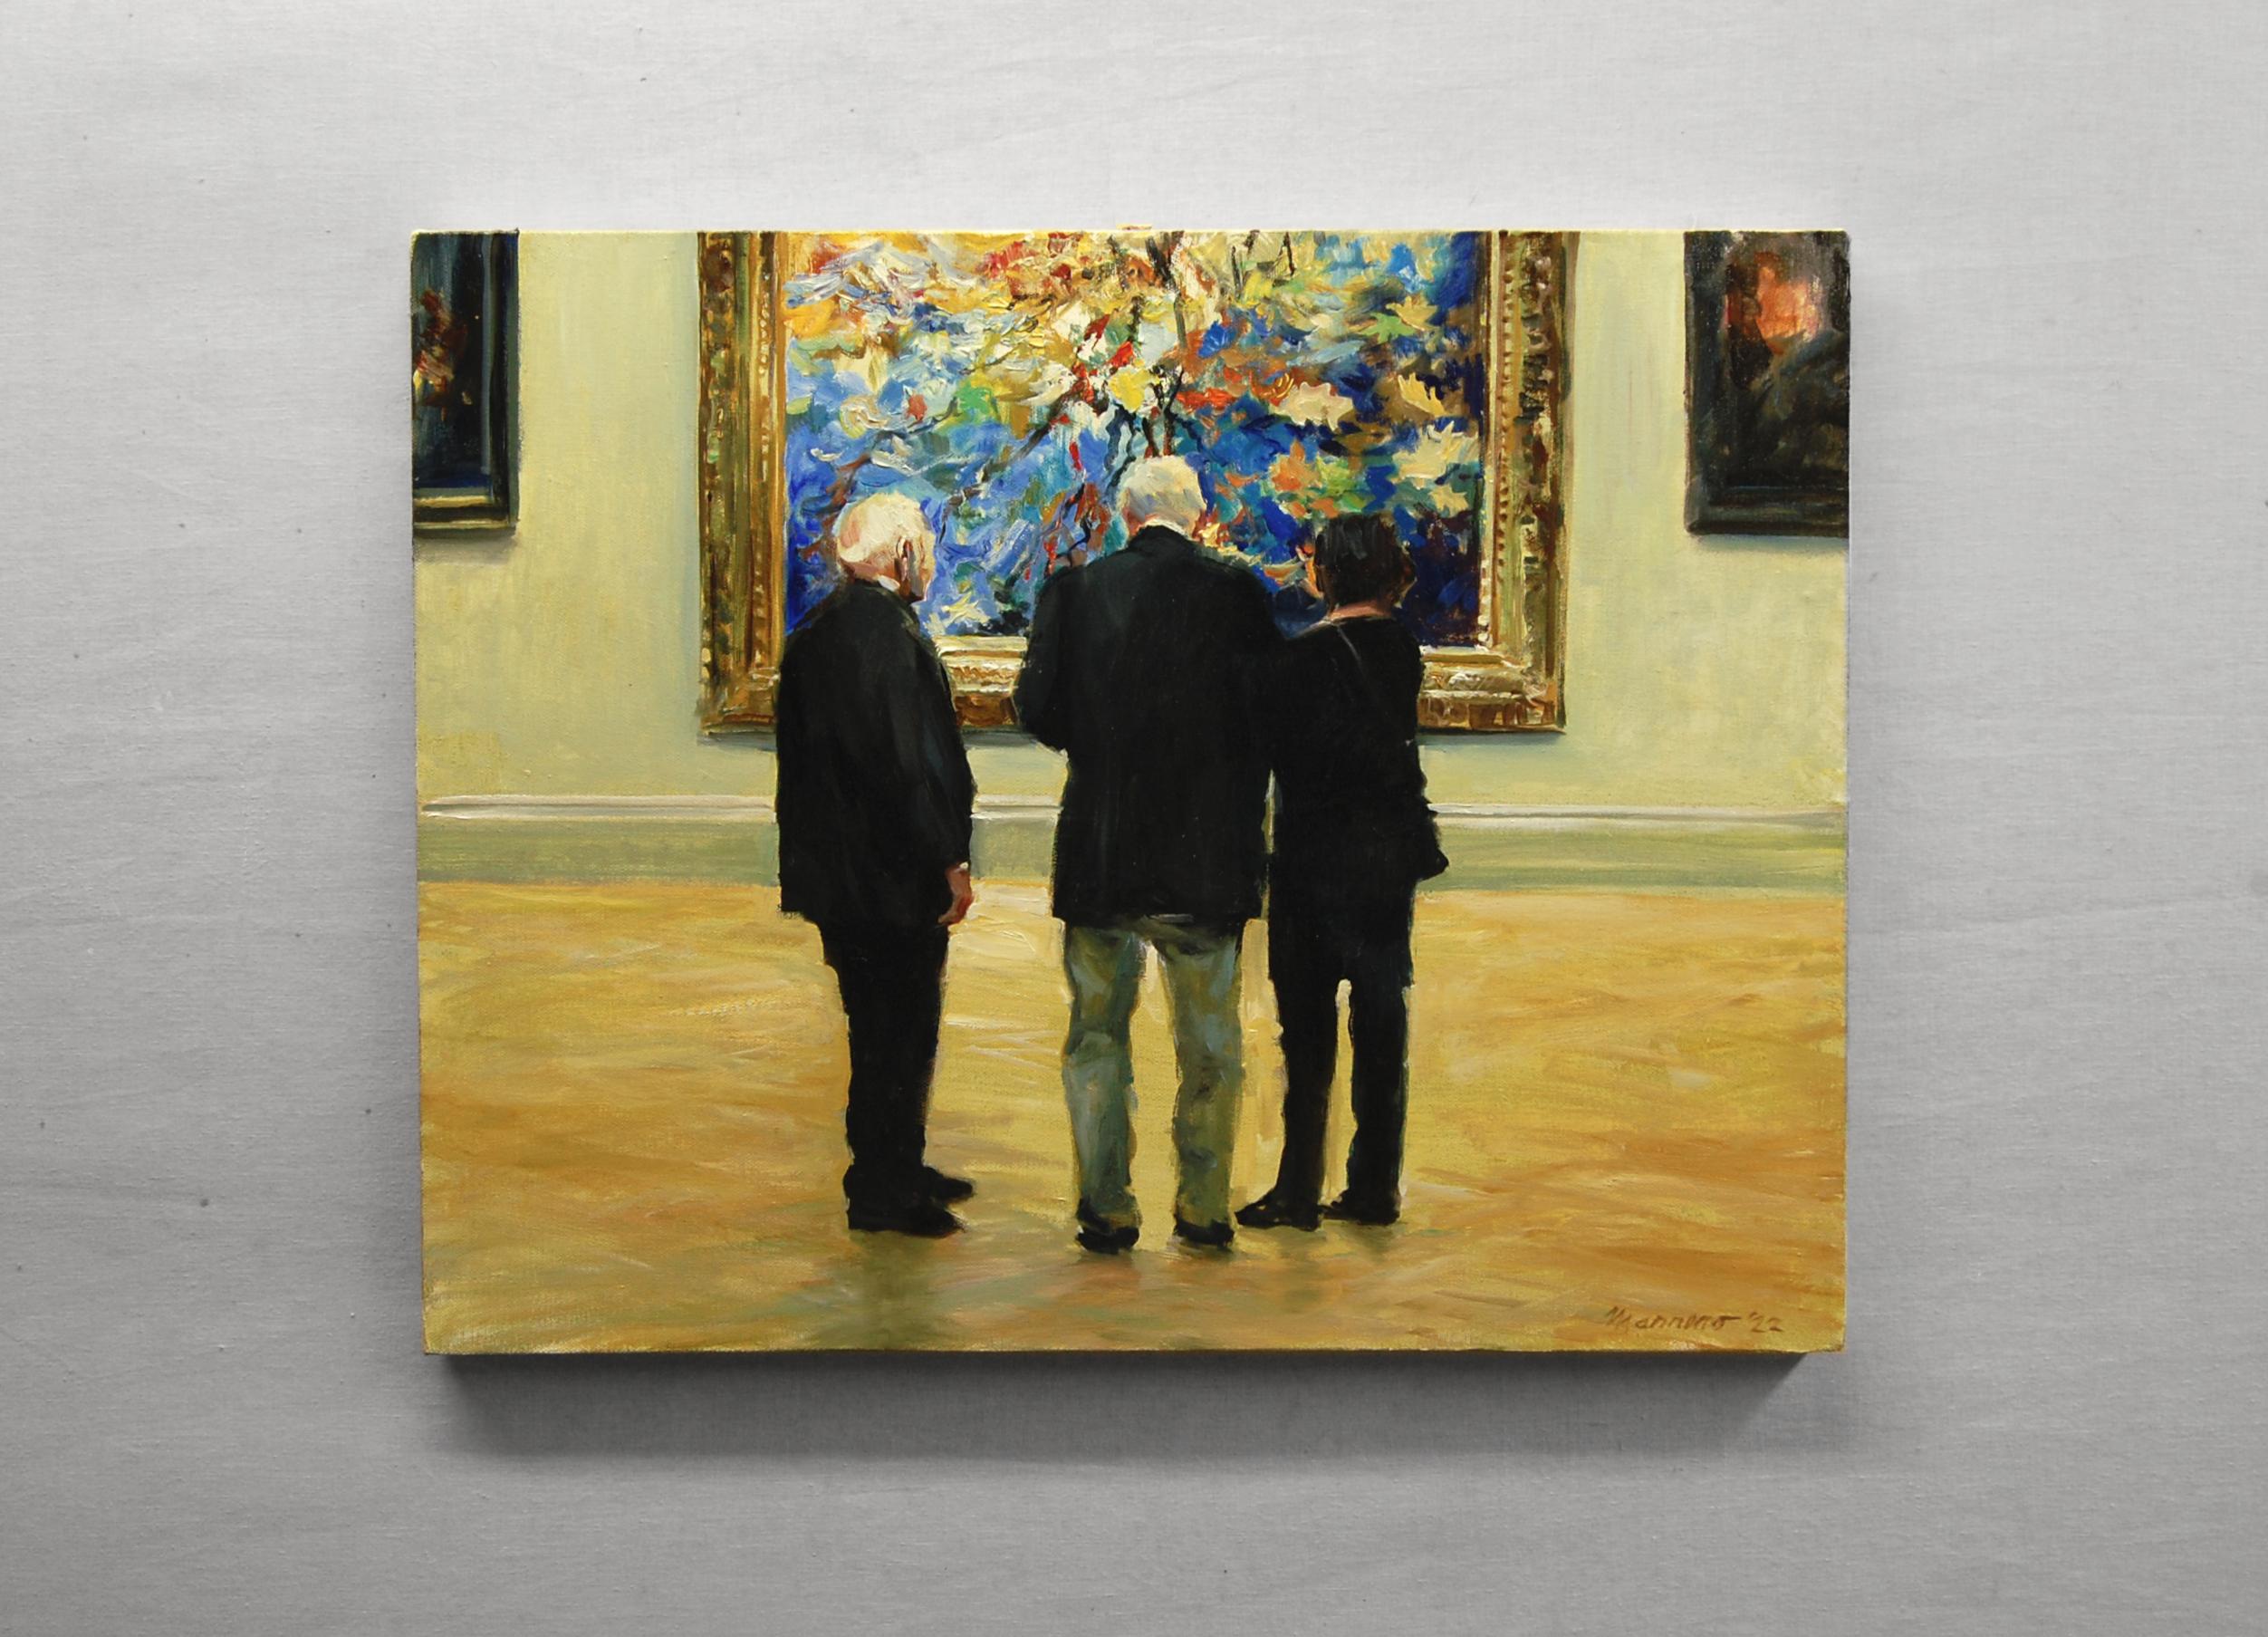 <p>Artist Comments<br>Artist Onelio Marrero shows three people observing a grand ornate painting in a museum. The mostly fictitious scene displays his professional experiences of watching in anticipation as collectors, critics, and art jurors move